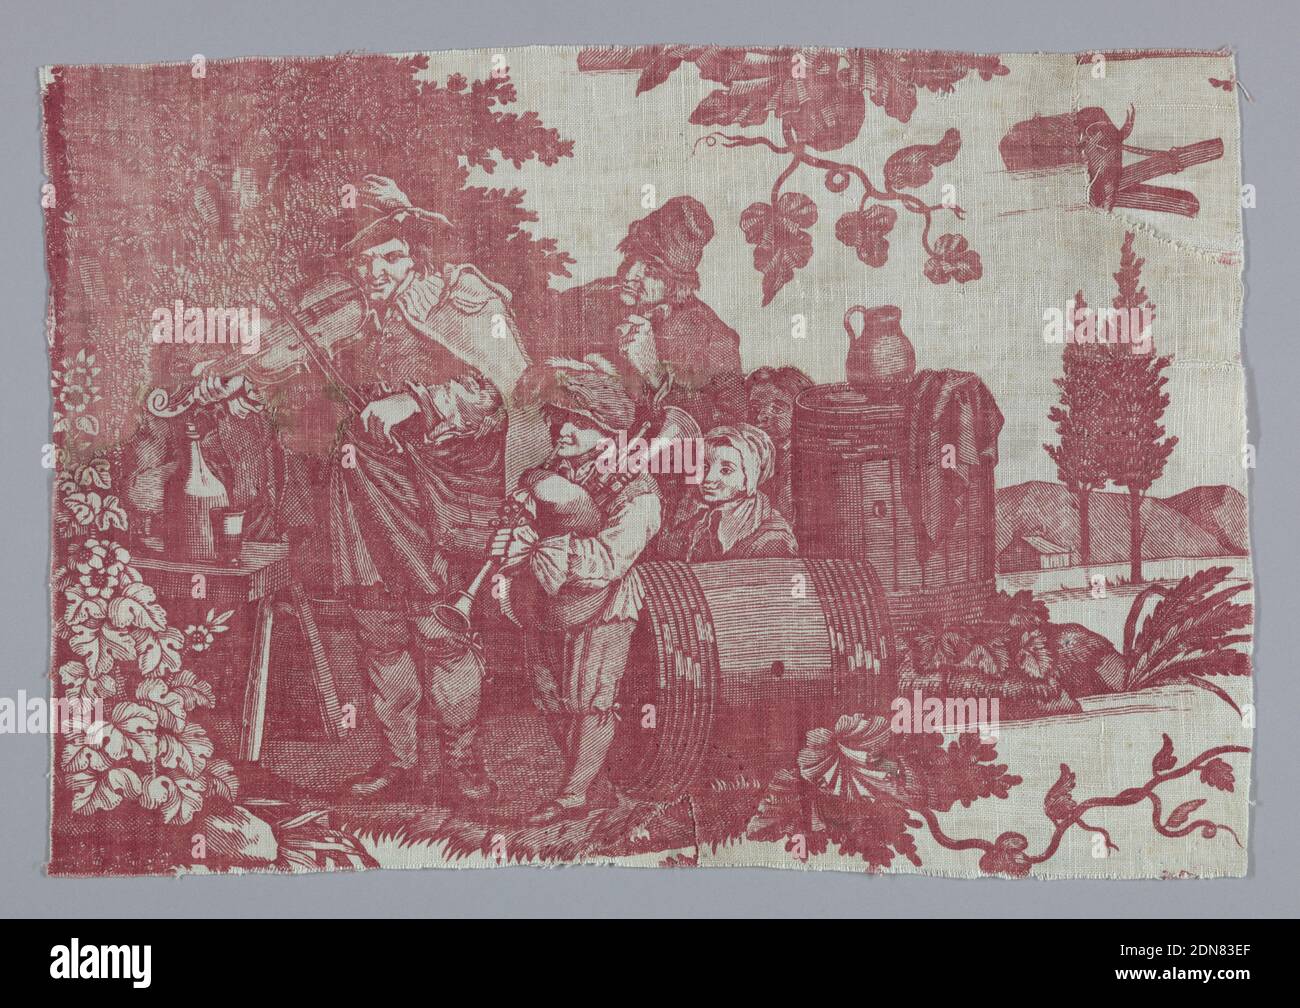 Fragment, Medium: cotton Technique: printed on plain weave; red, Fragment shows a man playing a violin and a boy playing bagpipes while a man and two children watch. Group is shown under trees near barrels., France, 18th century, printed, dyed & painted textiles, Fragment Stock Photo